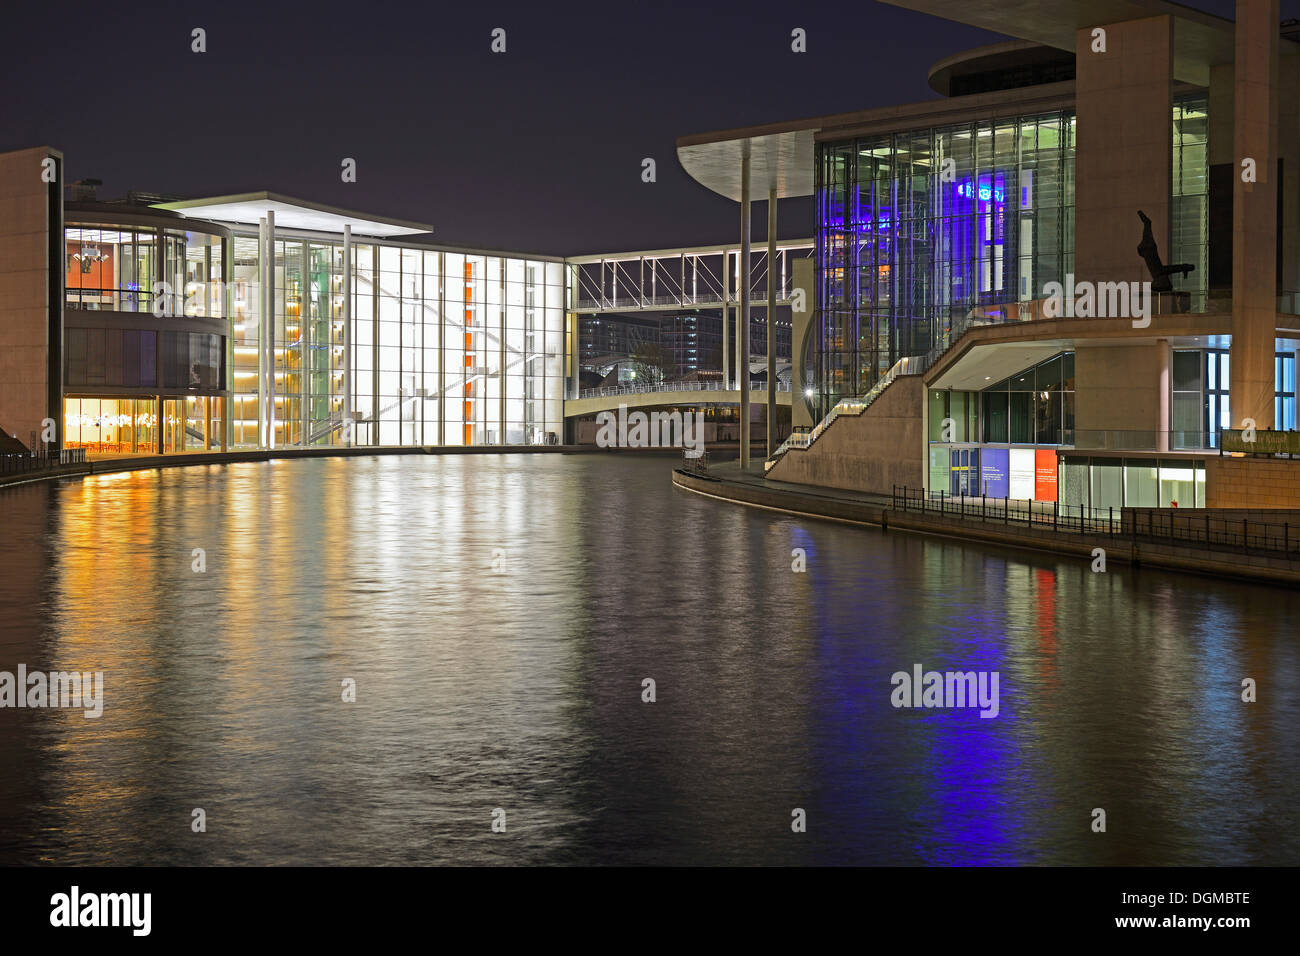 Water side of the Paul Loebe Building, rear, Marie-Elisabeth Lueders Building, right, on the Spree River in the evening Stock Photo